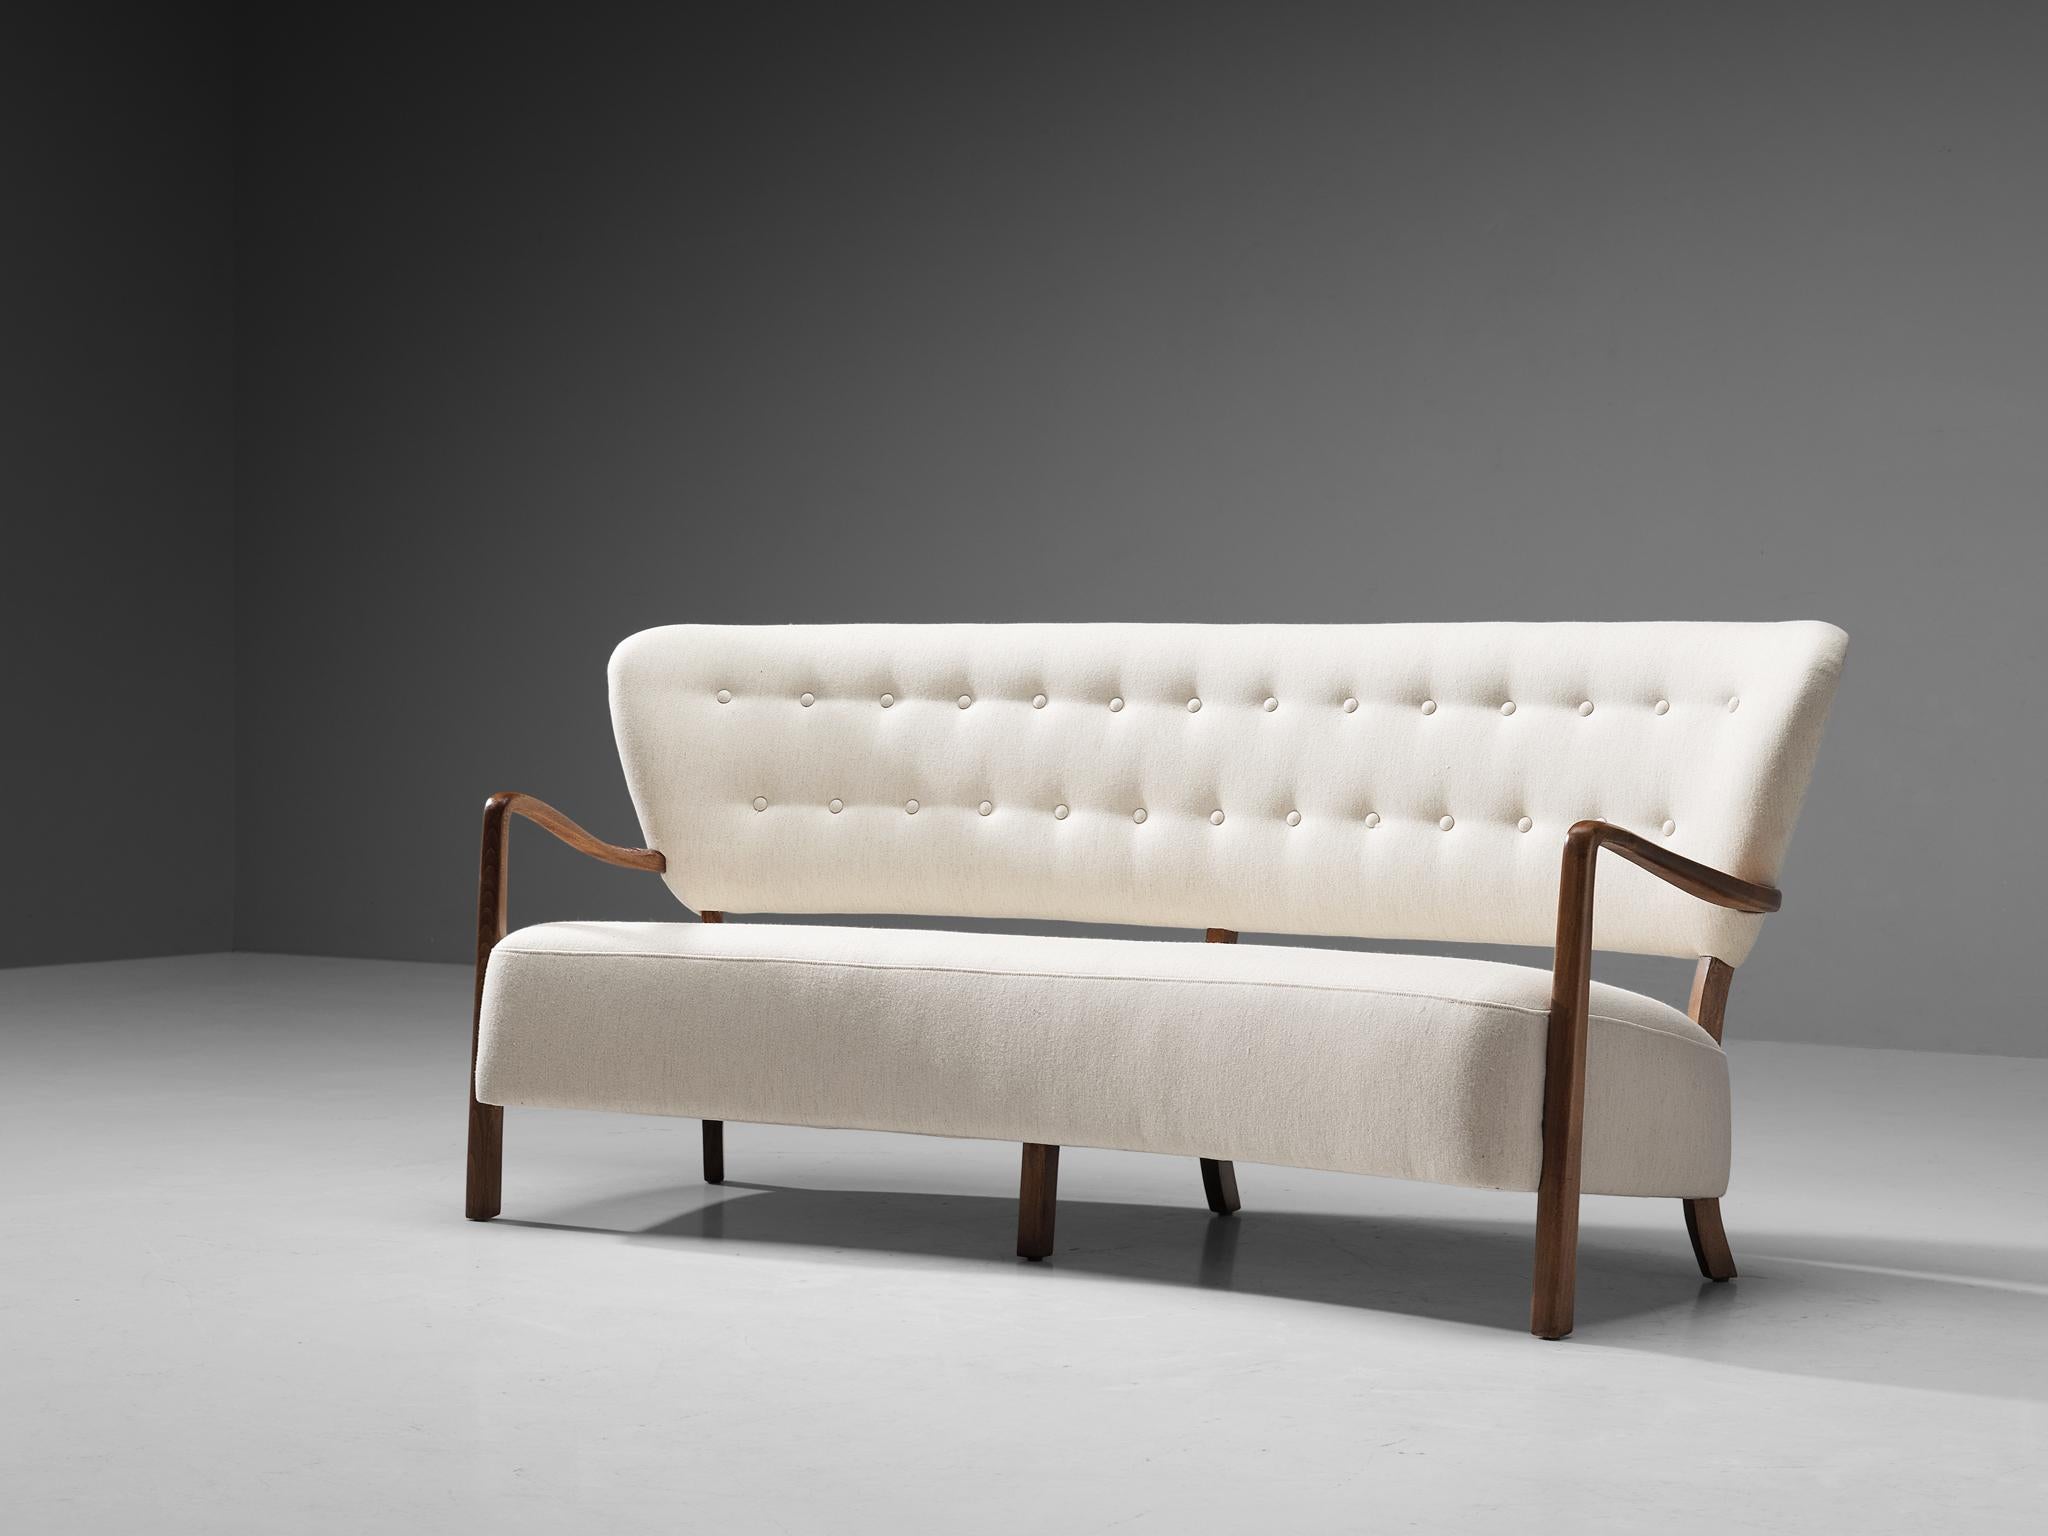 In the manner of Viggo Boesen, sofa, fabric Gabriel 'Savak', stained beech, Denmark, 1940s 

This charming sofa is designed in the manner of Danish designer Viggo Boesen (1907-1985), whose oeuvre is marked by organic movement and the use of honest,